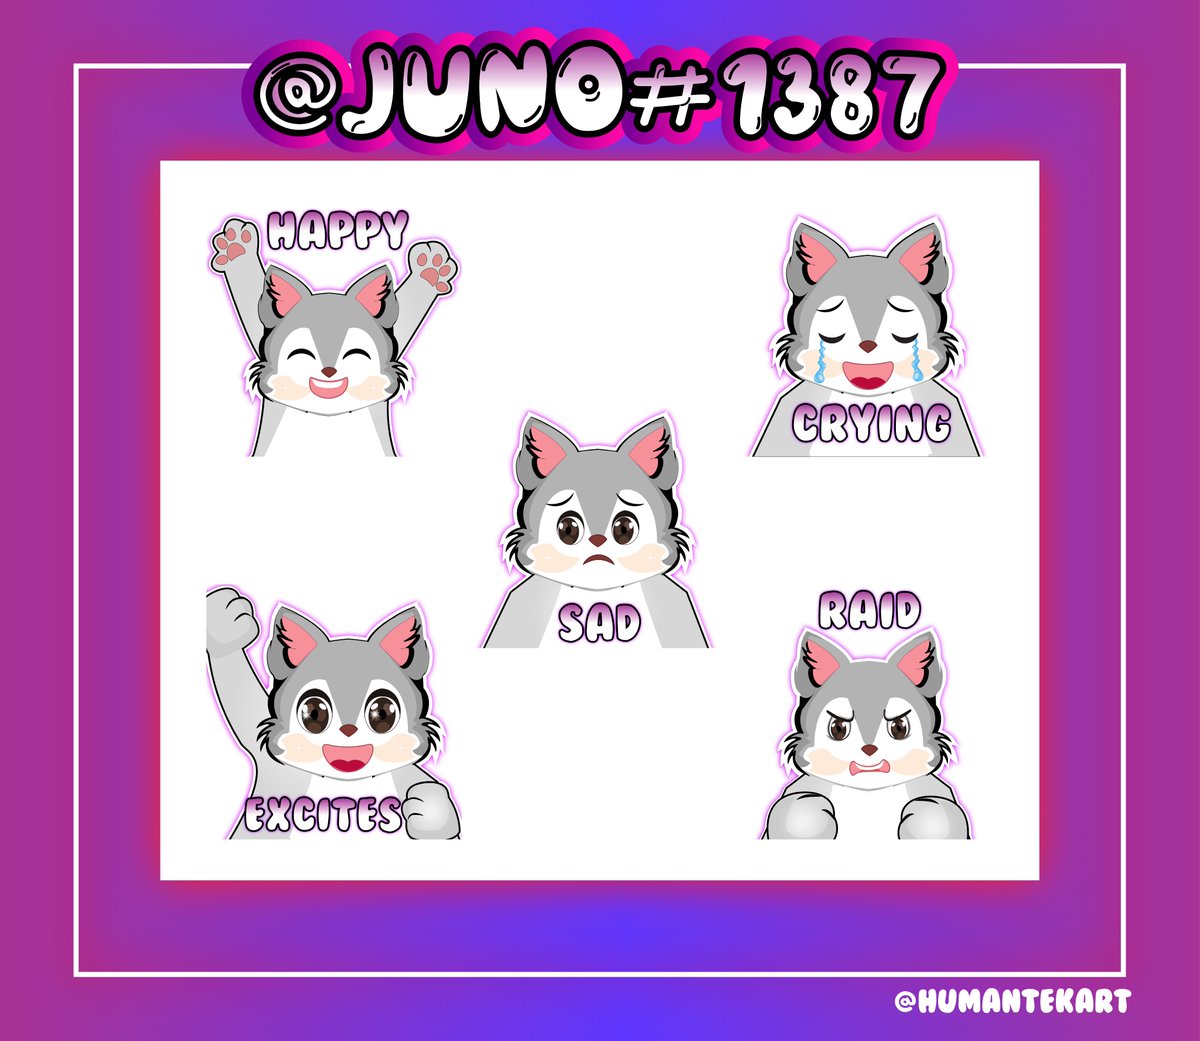 #promotiontime

I made this Cute Cat emotes for my client <3 DM me for your orders 

#twitch #twitter #stream #streamergirl #affiliated #customartwork #panels #twitch #dopeart #supportsmallstreamers #streaming